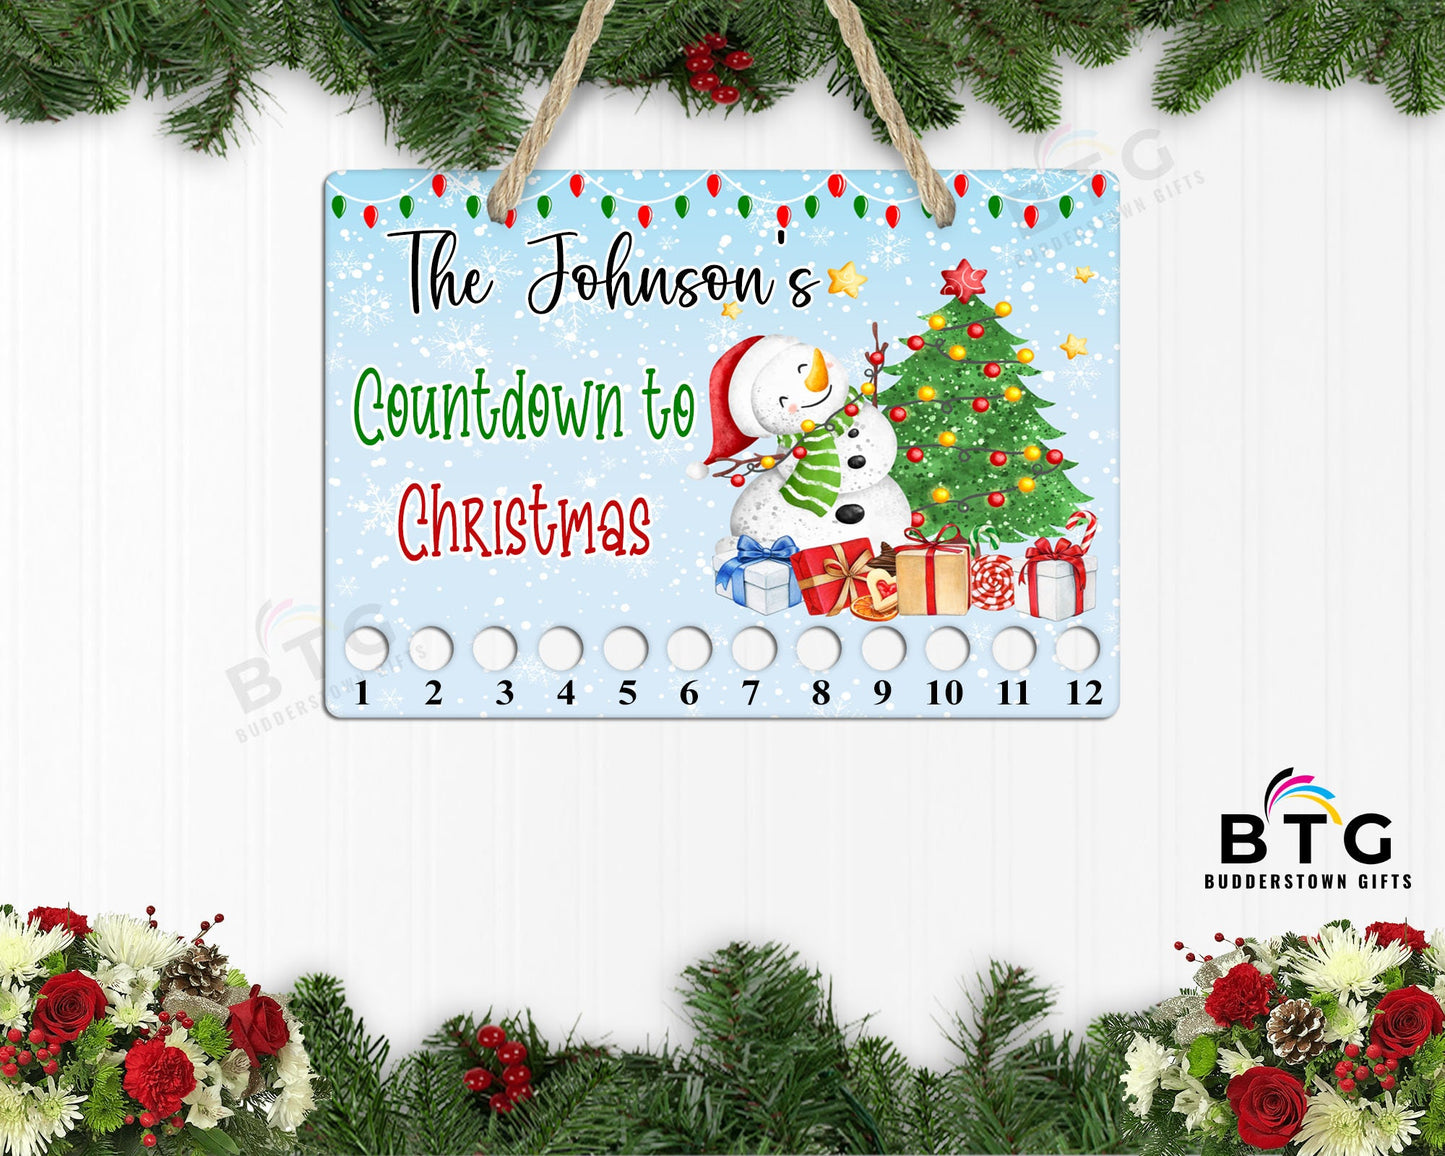 Candy Cane Christmas Countdown - 12 Days to Christmas - Snowman Decor - Kids Interactive